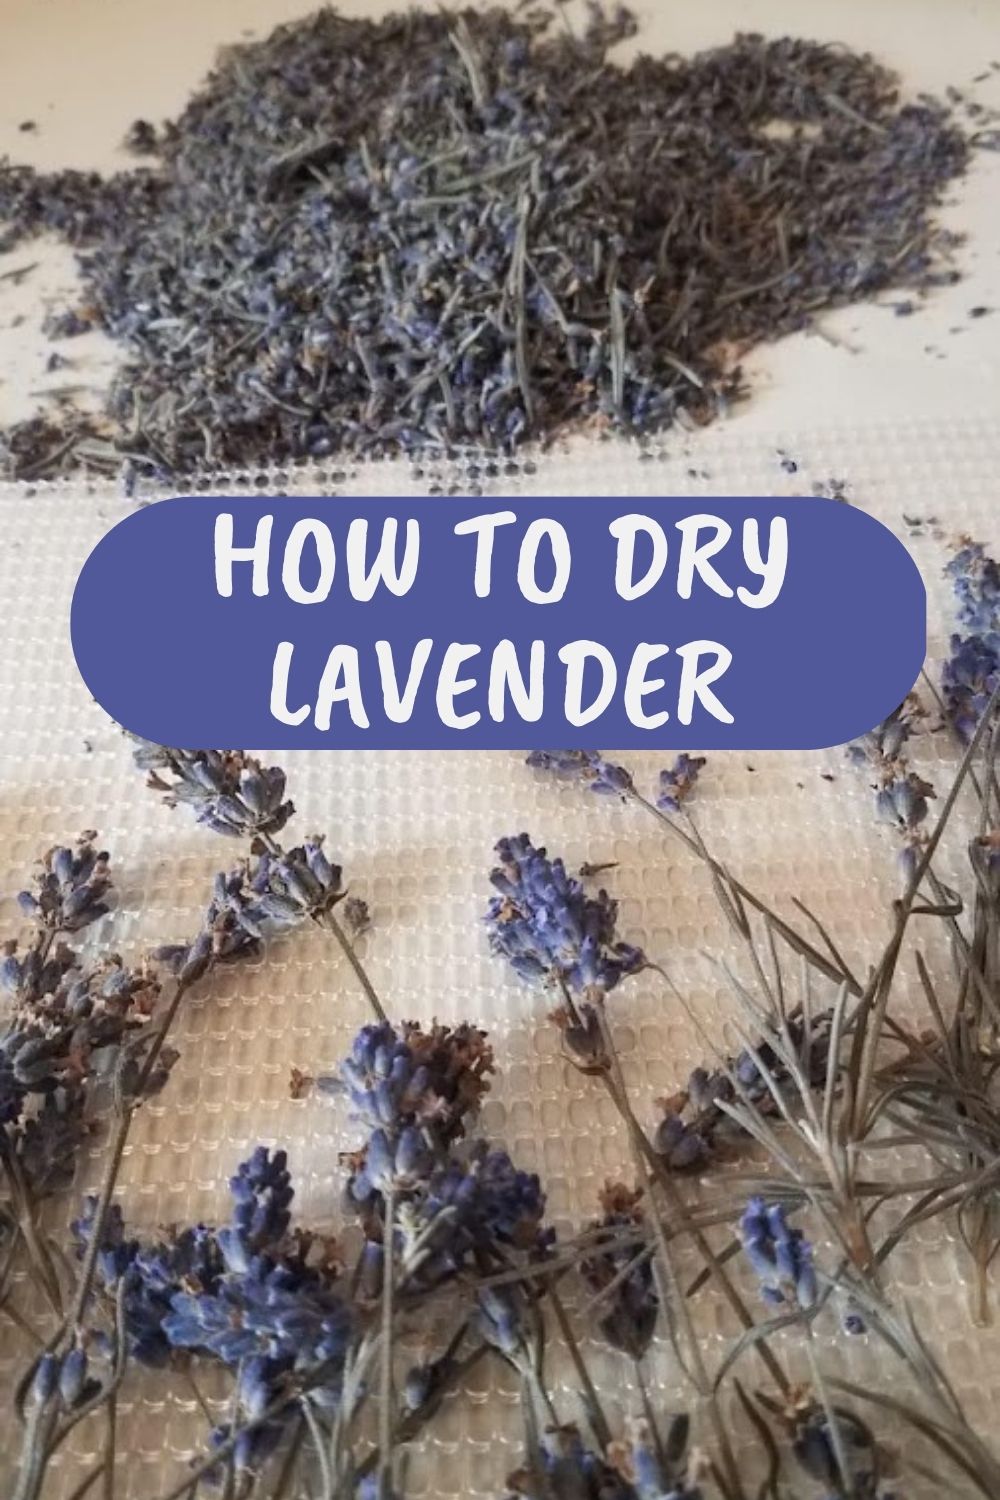 How to dry lavender.